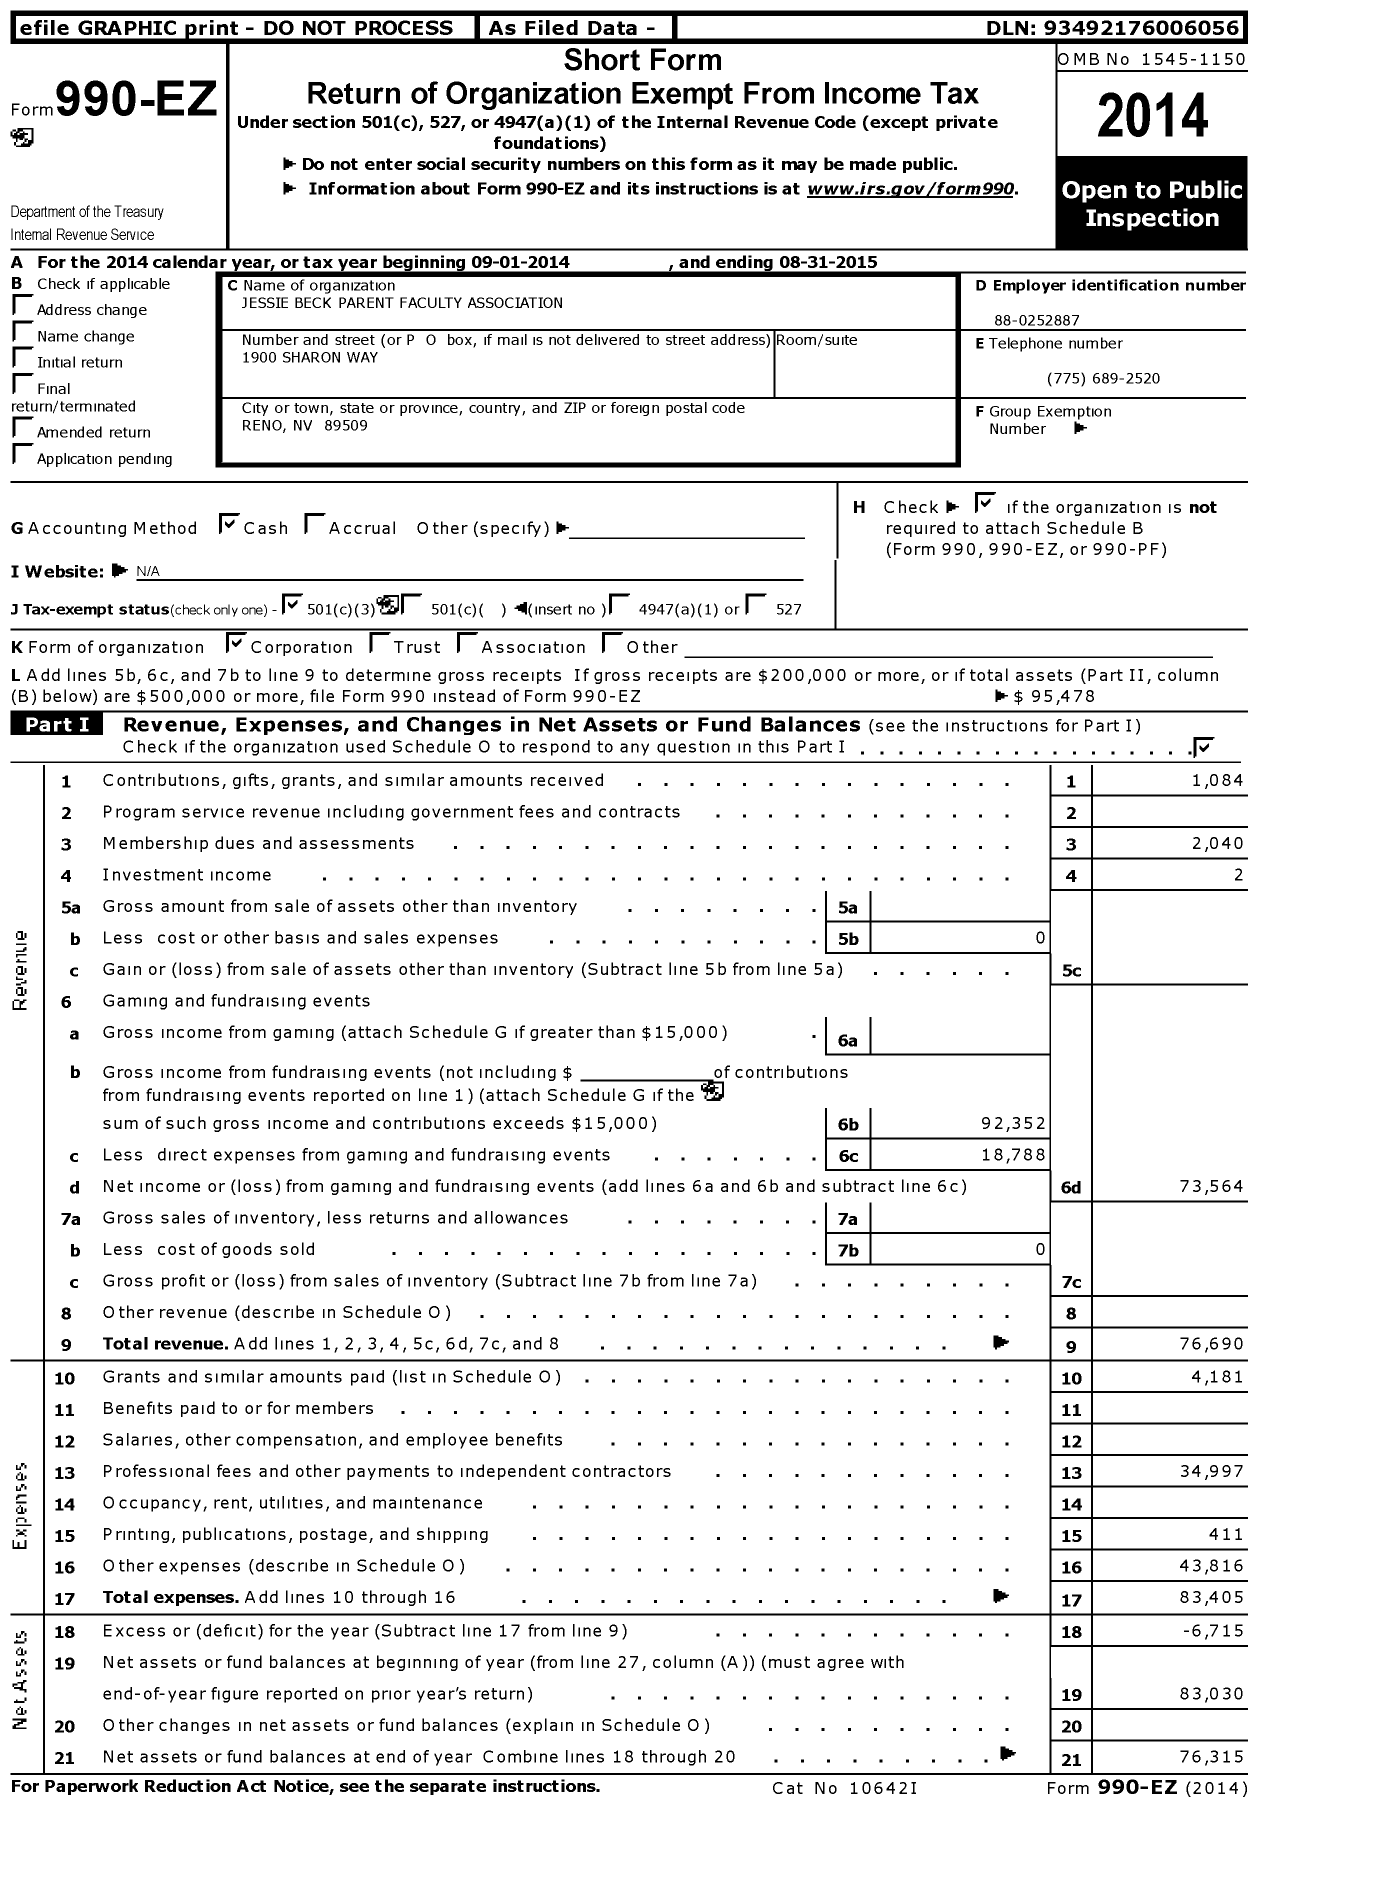 Image of first page of 2014 Form 990EZ for Jessie Beck Parent Faculty Association